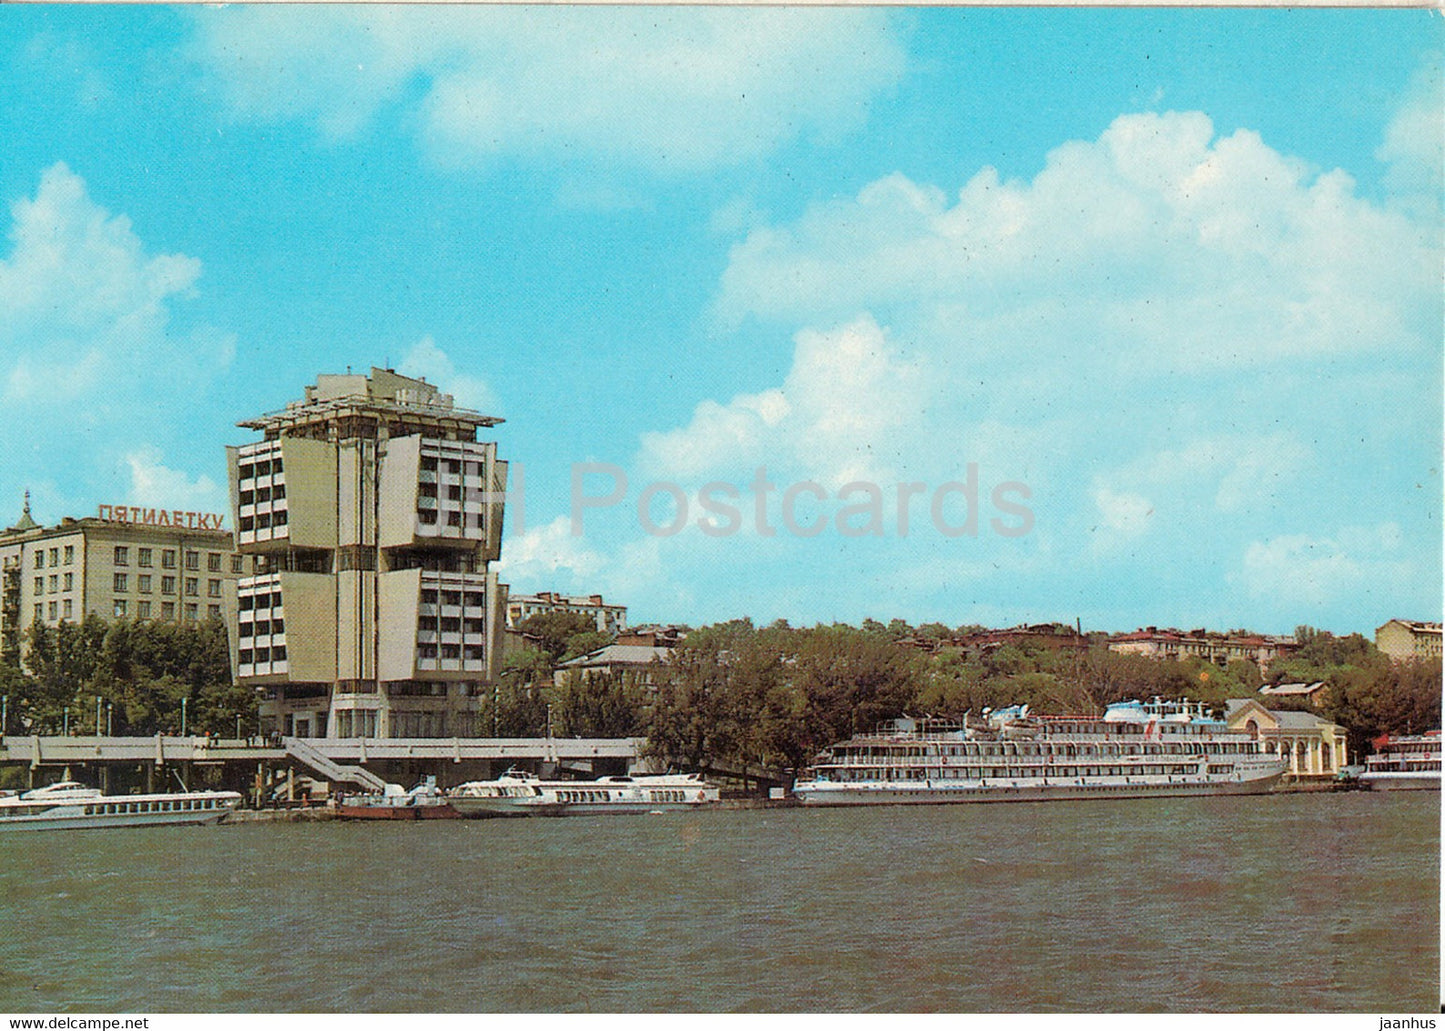 Rostov-on-Don - hotel Yakor (Anchor) - postal stationery - 1982 - Russia USSR - unused - JH Postcards